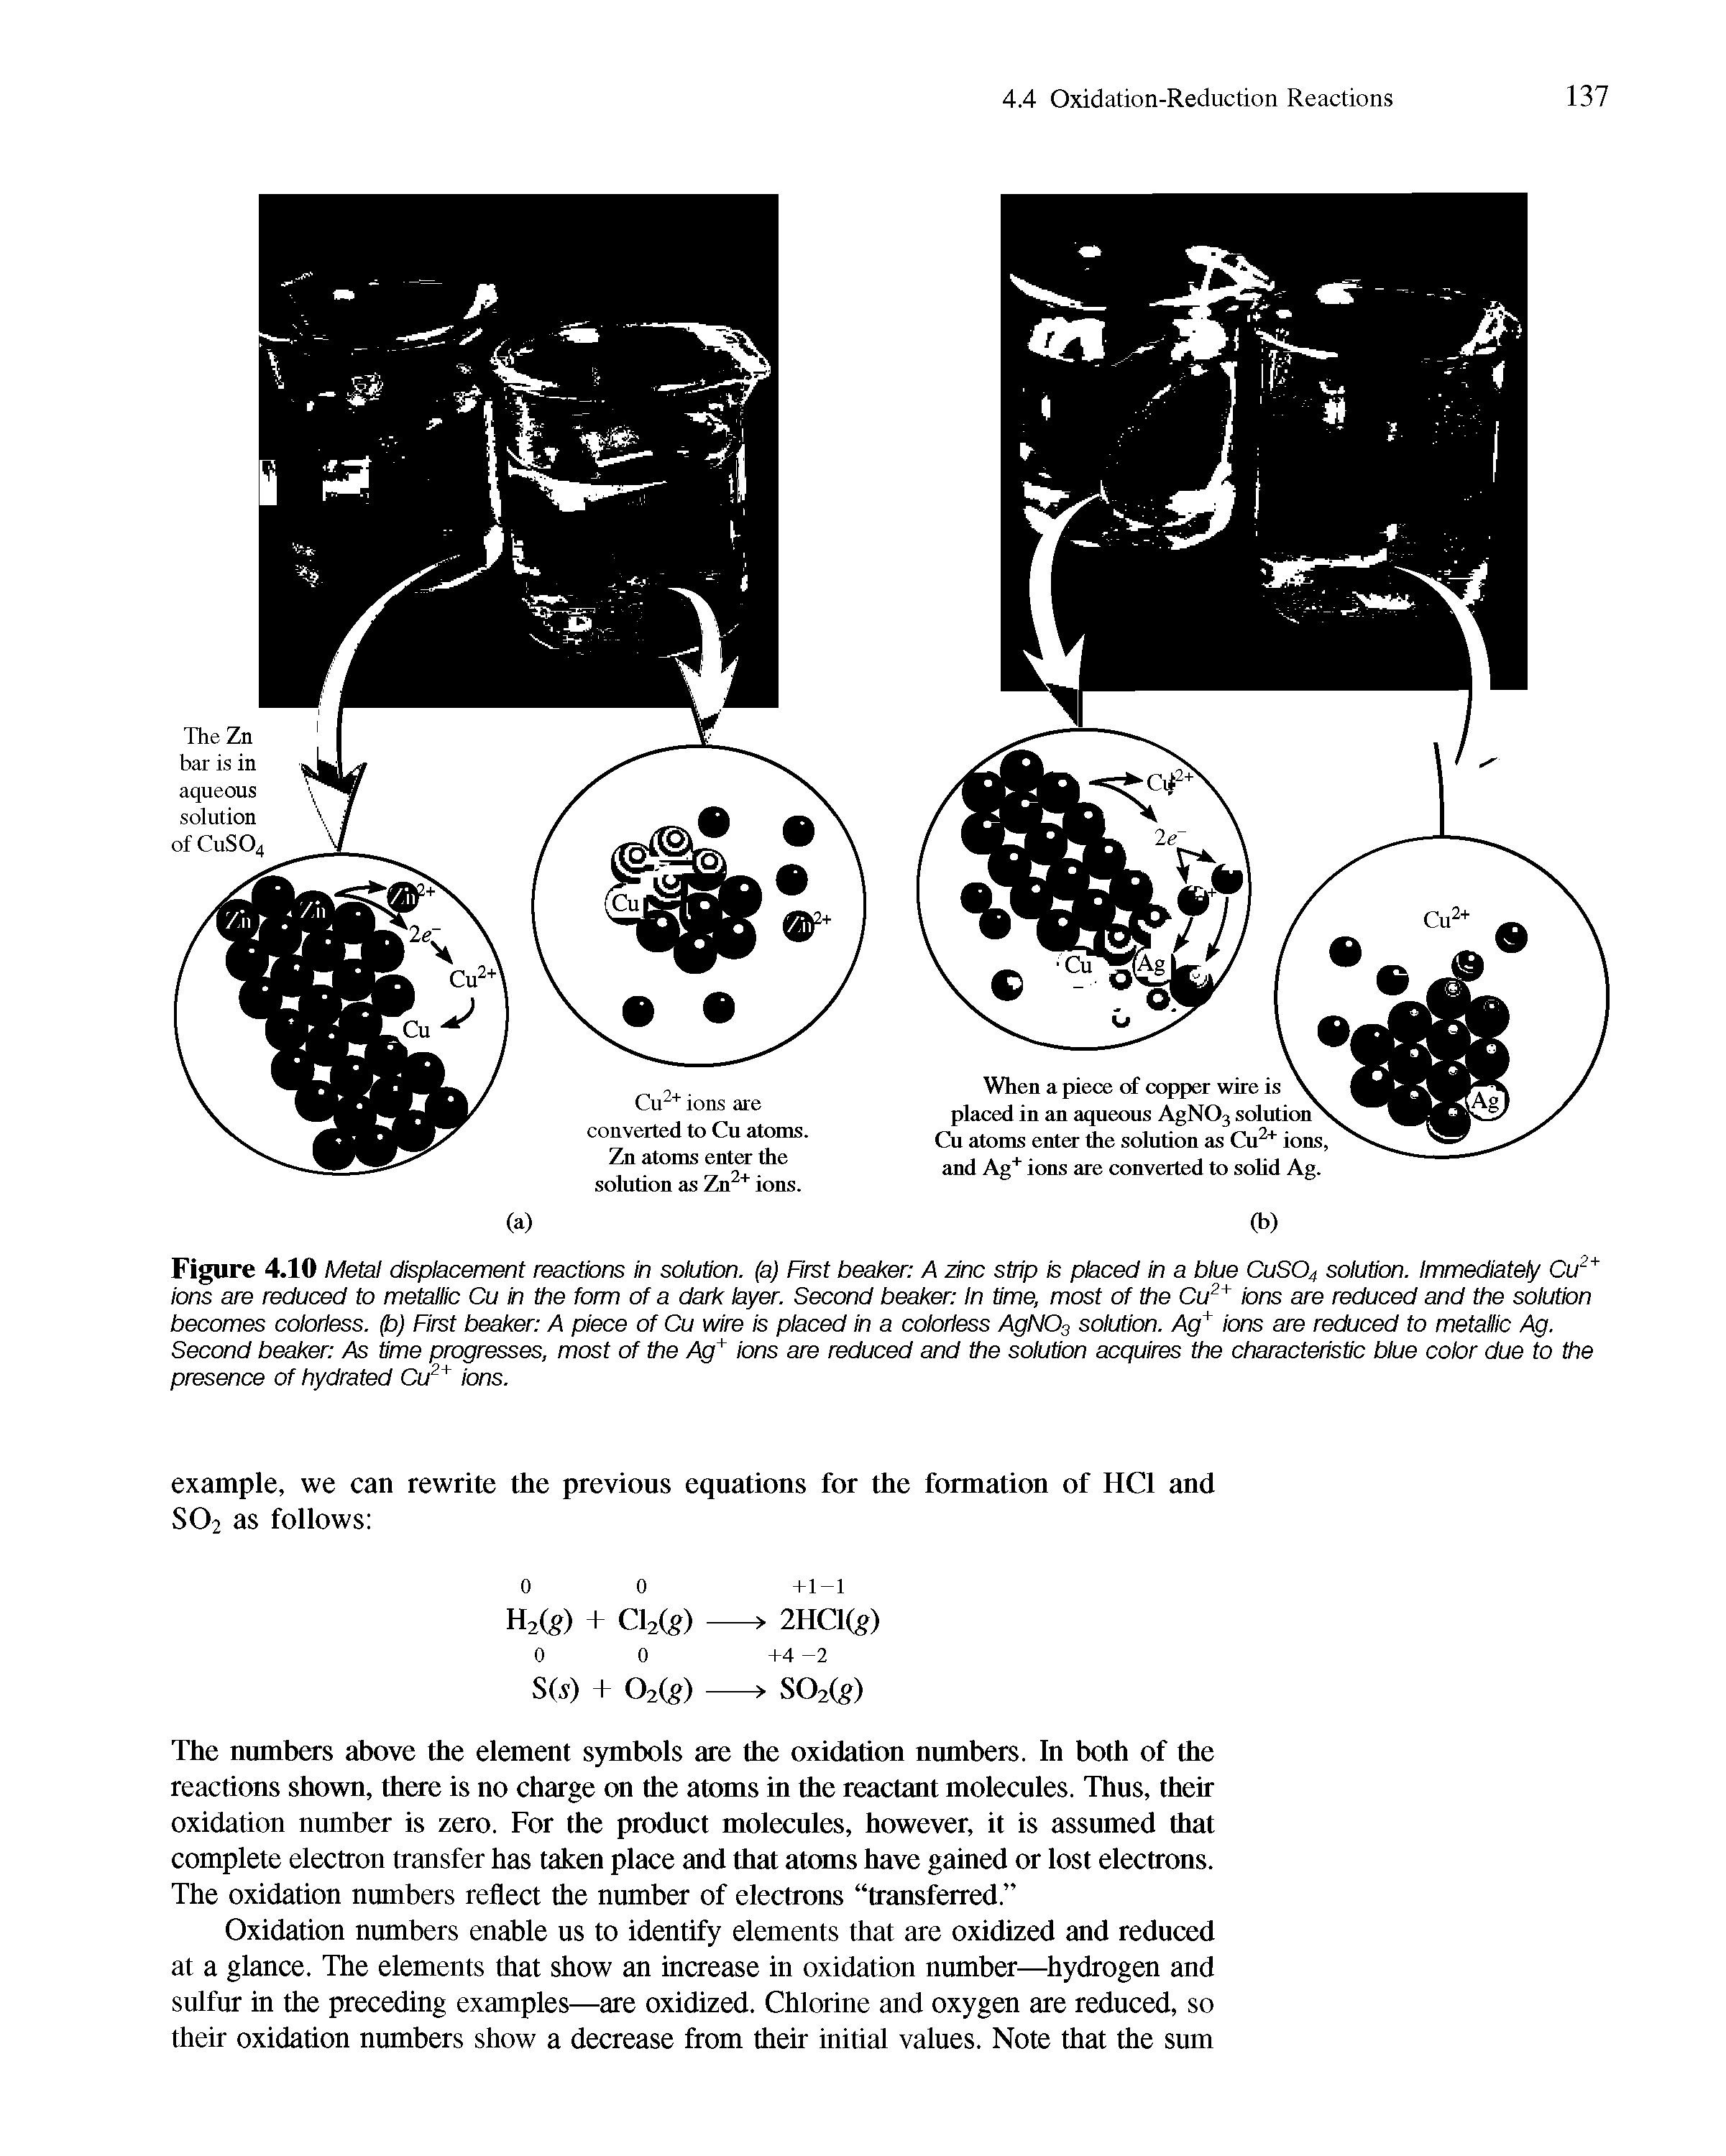 Figure 4.10 Metal displacement reactions in solution, (a) Rrst beaker A zinc strip is placed in a blue CUSO4 solution. Immediately Cu ions are reduced to metallic Cu h the form of a dark layer. Second beaker In time, most of the Cu bns are reduced and the solution becomes colorless, p) First beaker A piece of Cu wire is placed in a colorless AgNOg solution. Ag bns are reduced to metaSic Ag. Second beaker As time progresses, most of the Ag bns are reduced and the solution acquires the characteristic blue cobr due to the...